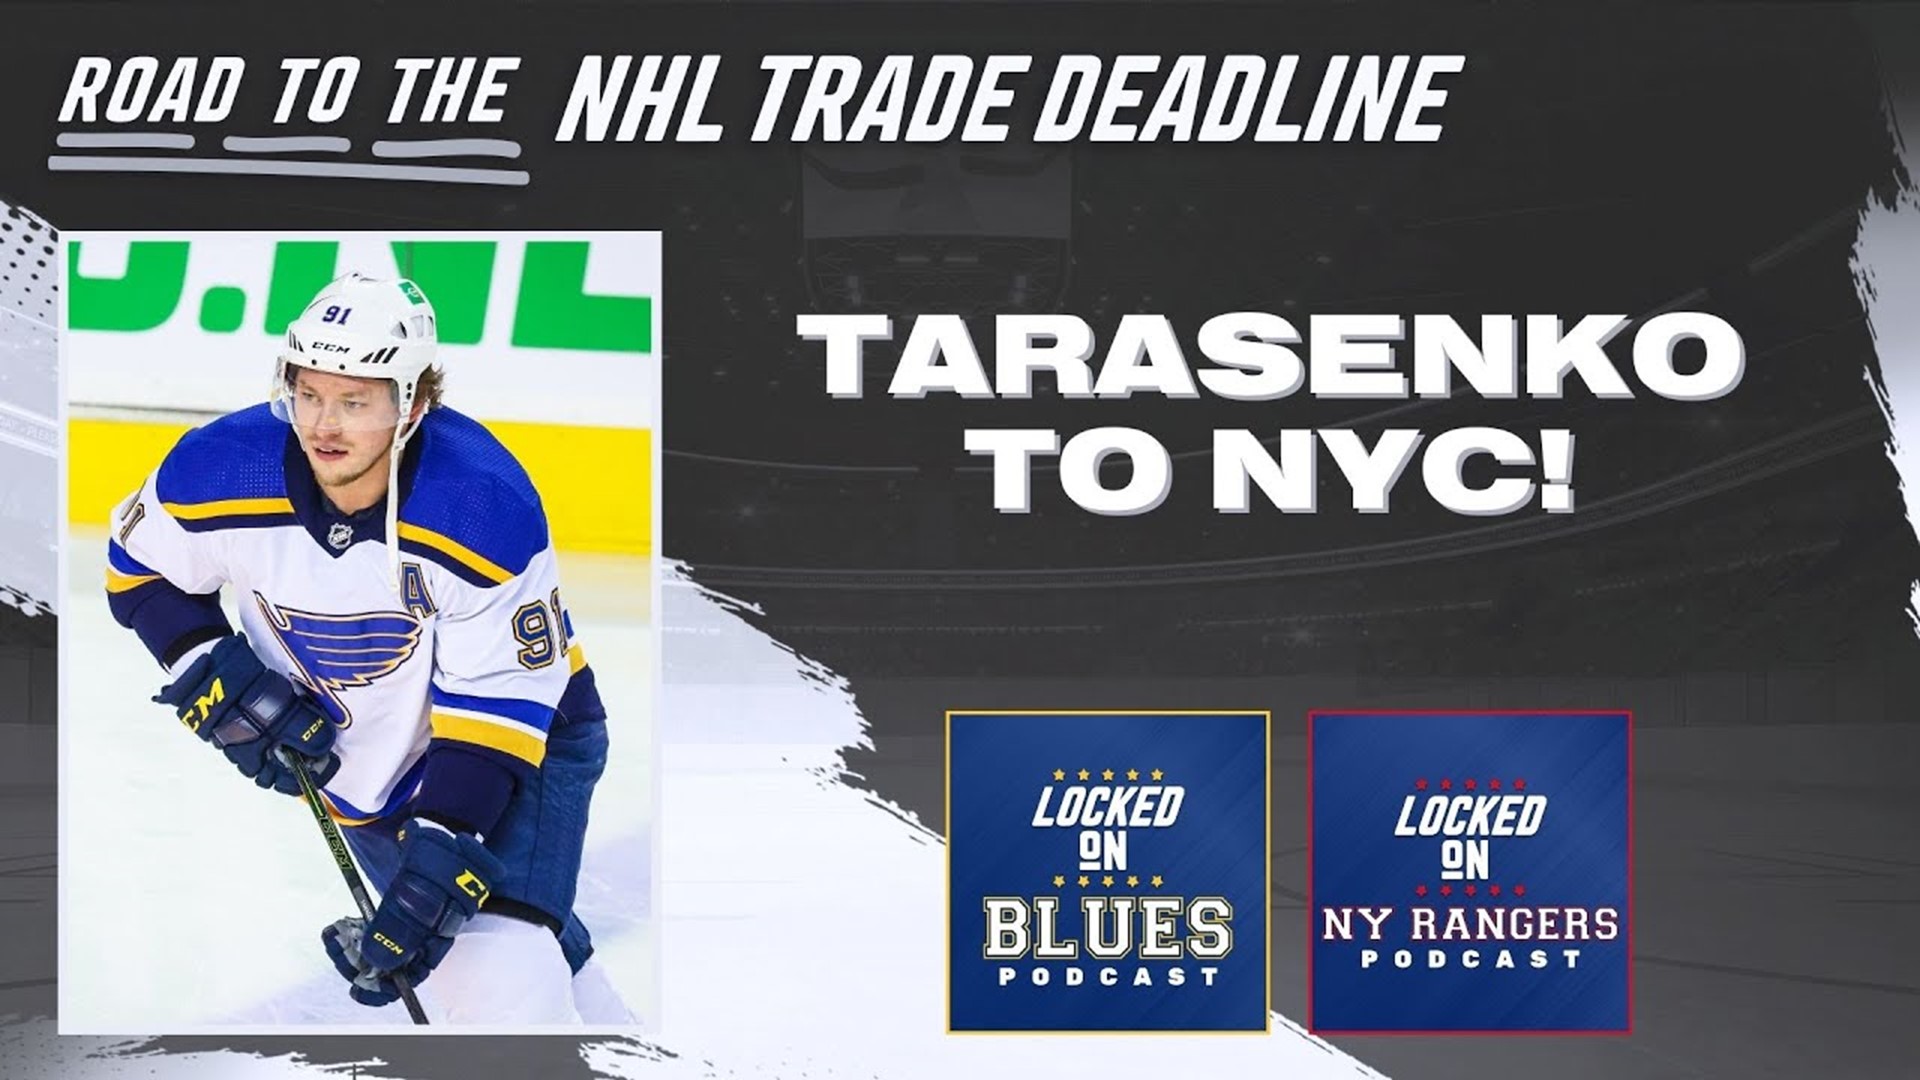 The St. Louis Blues have traded Vladimir Tarasenko to the New York Rangers. Who won the deal?